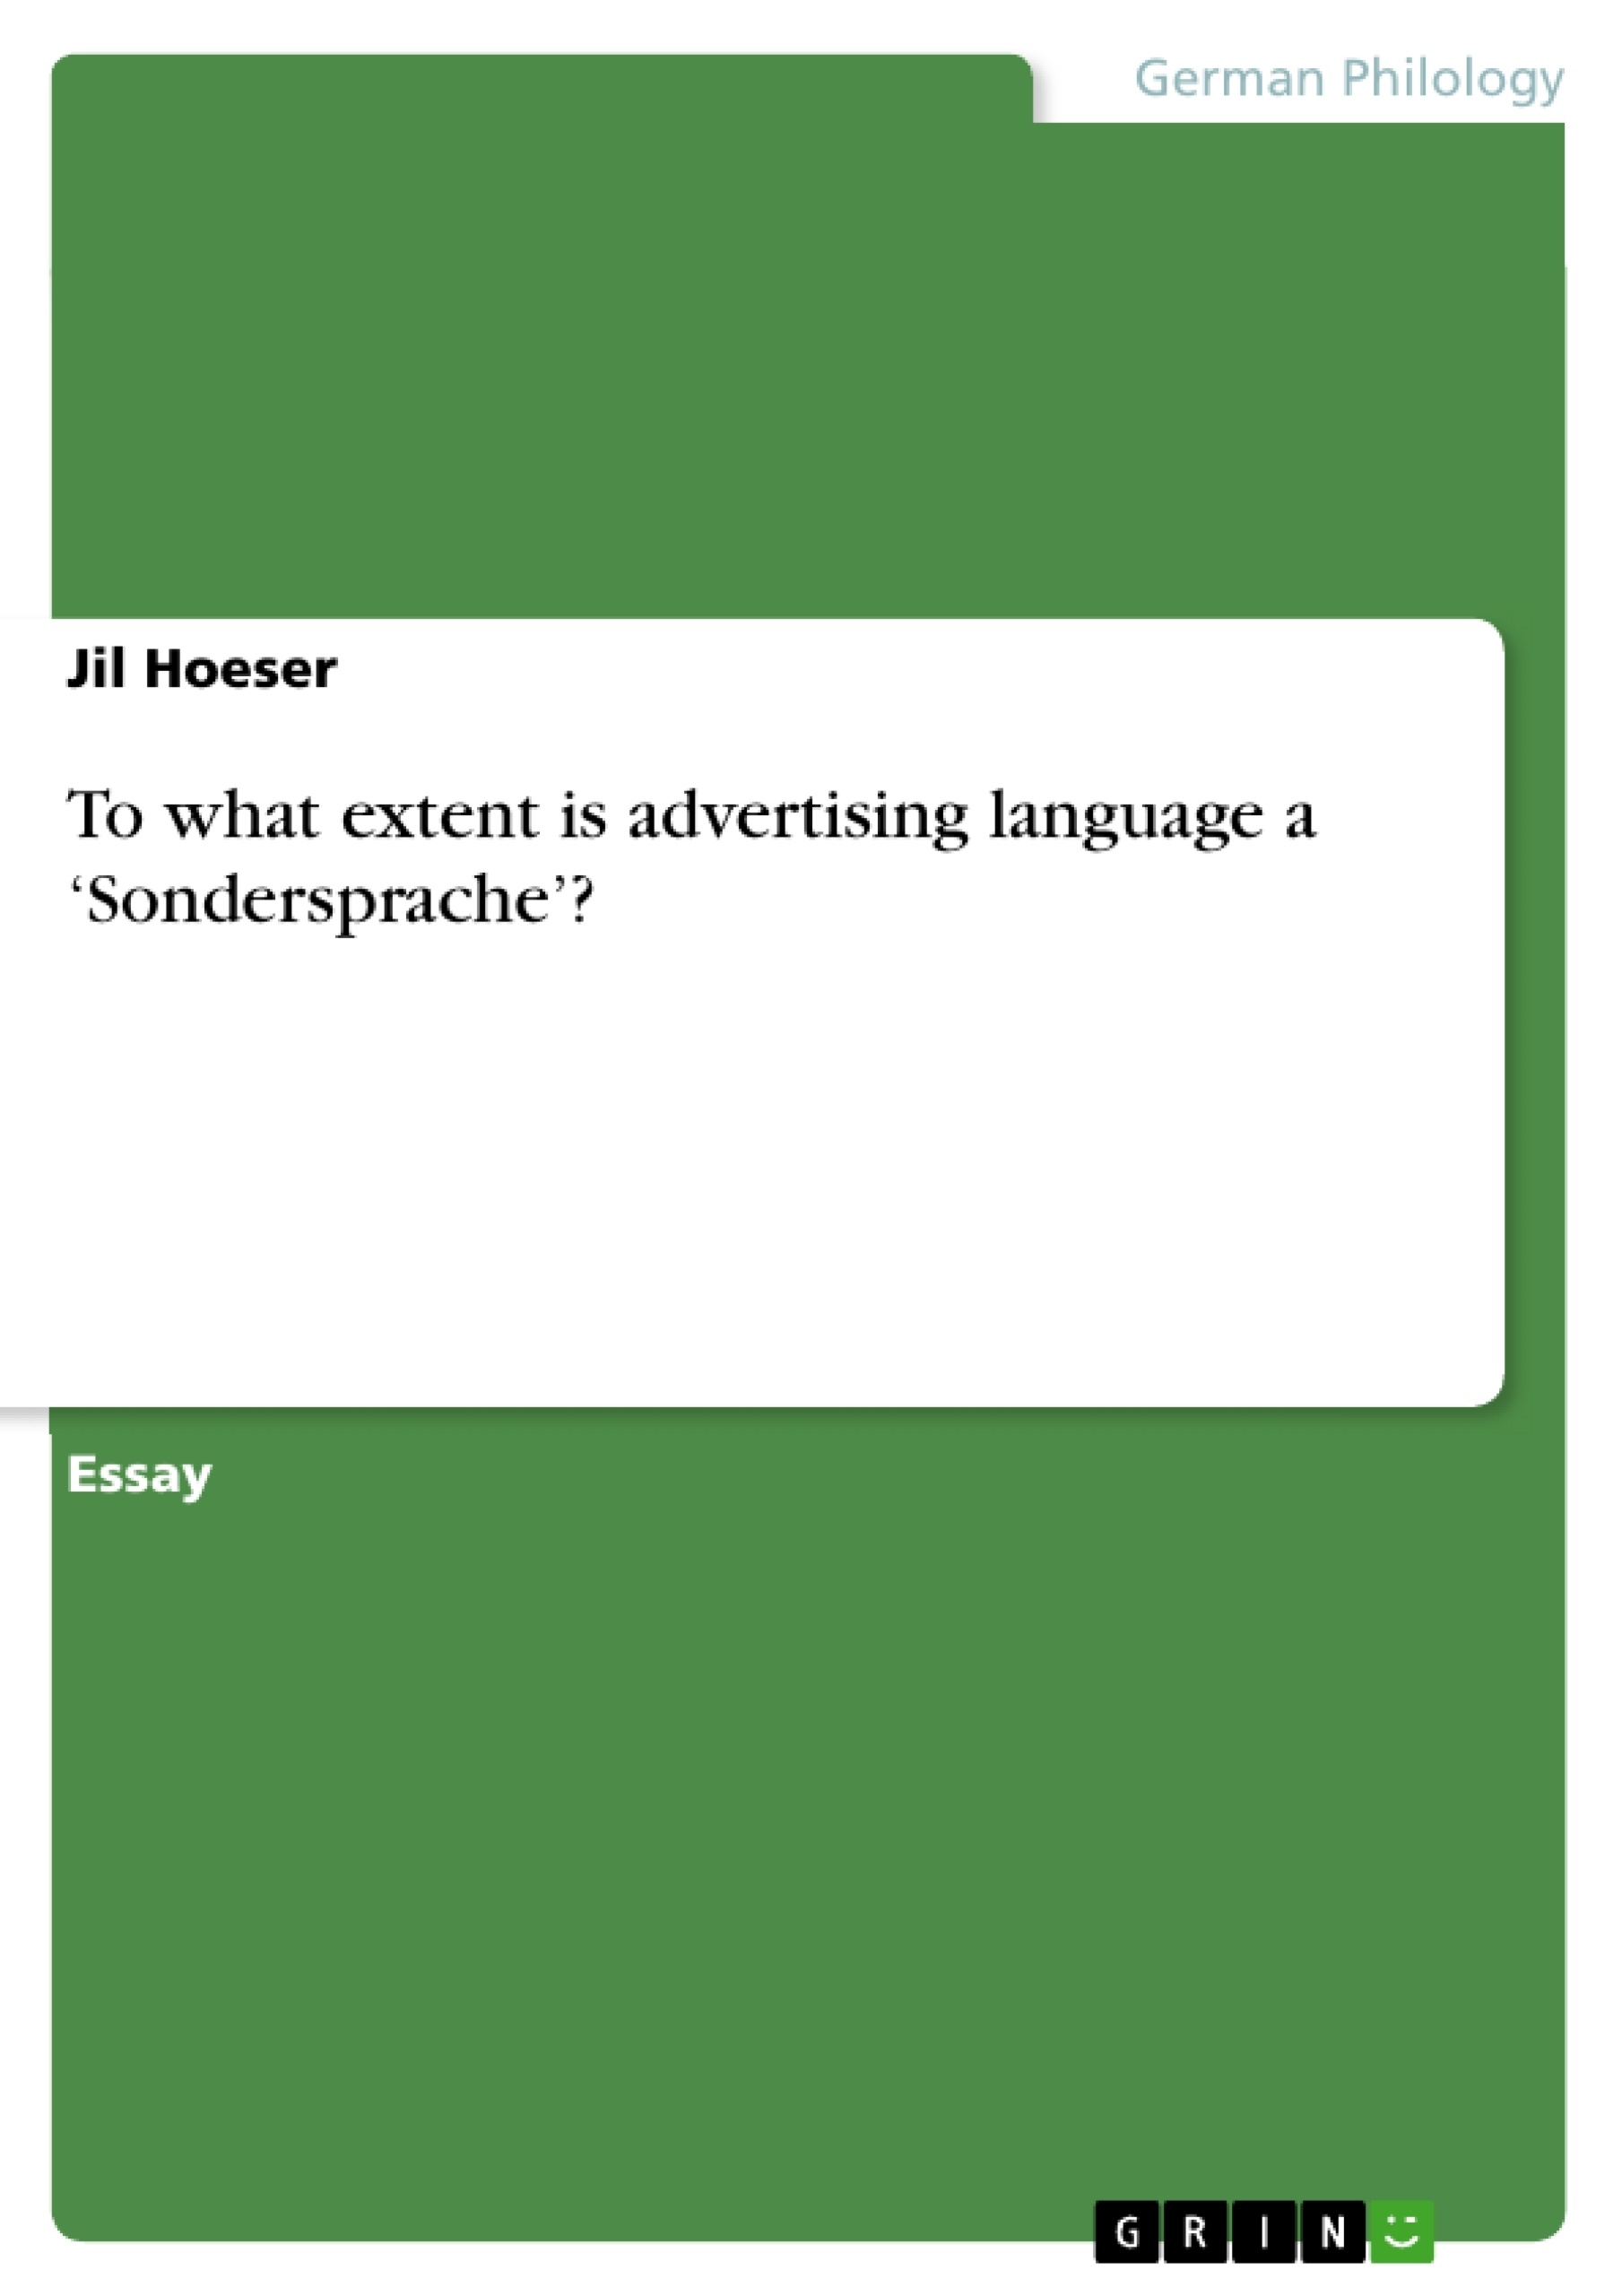 Titre: To what extent is advertising language a ‘Sondersprache’?